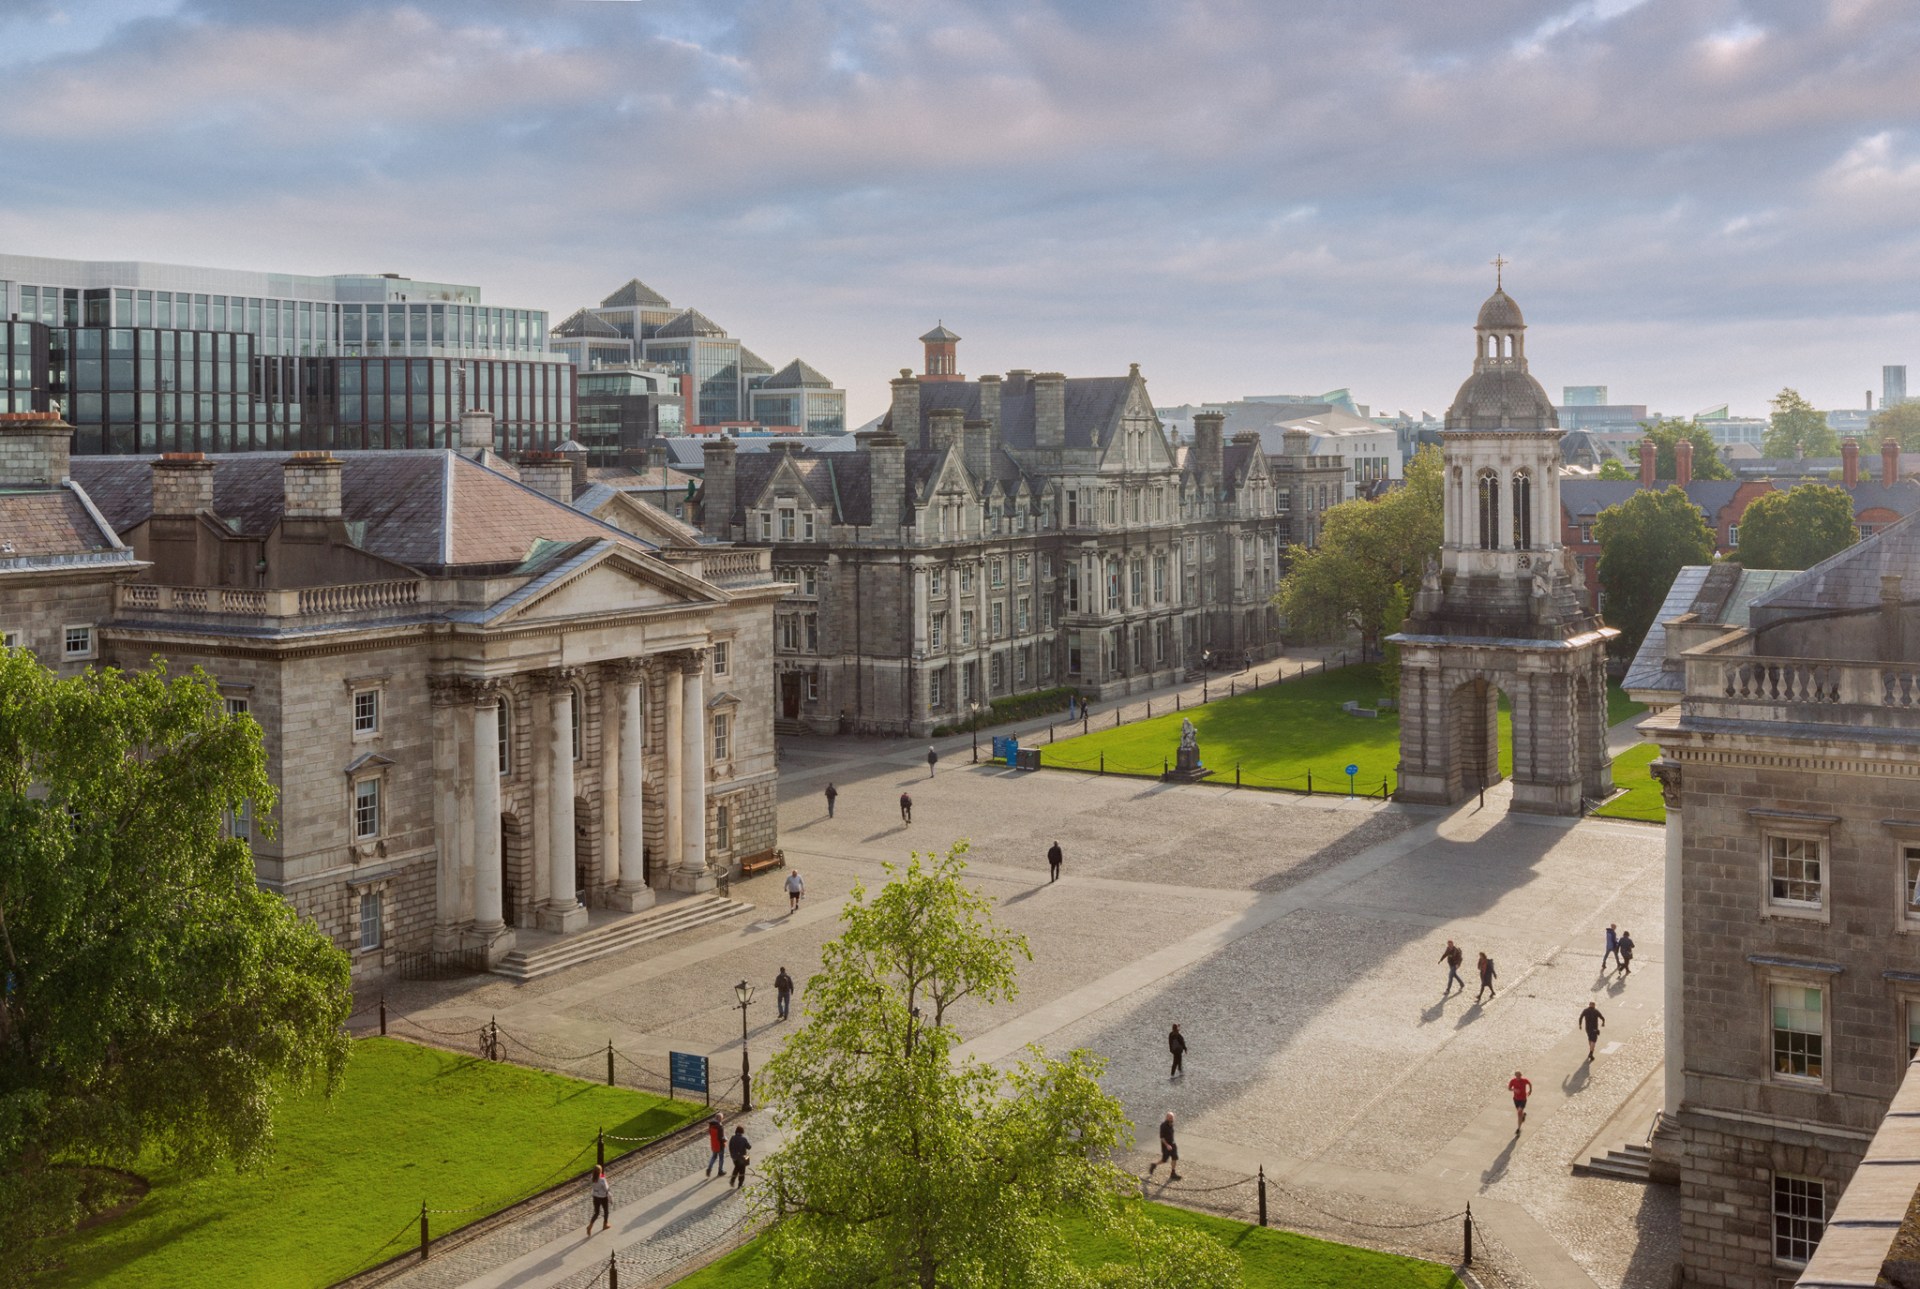 Bird's eye view of Trinity Square with sun shining and people walking